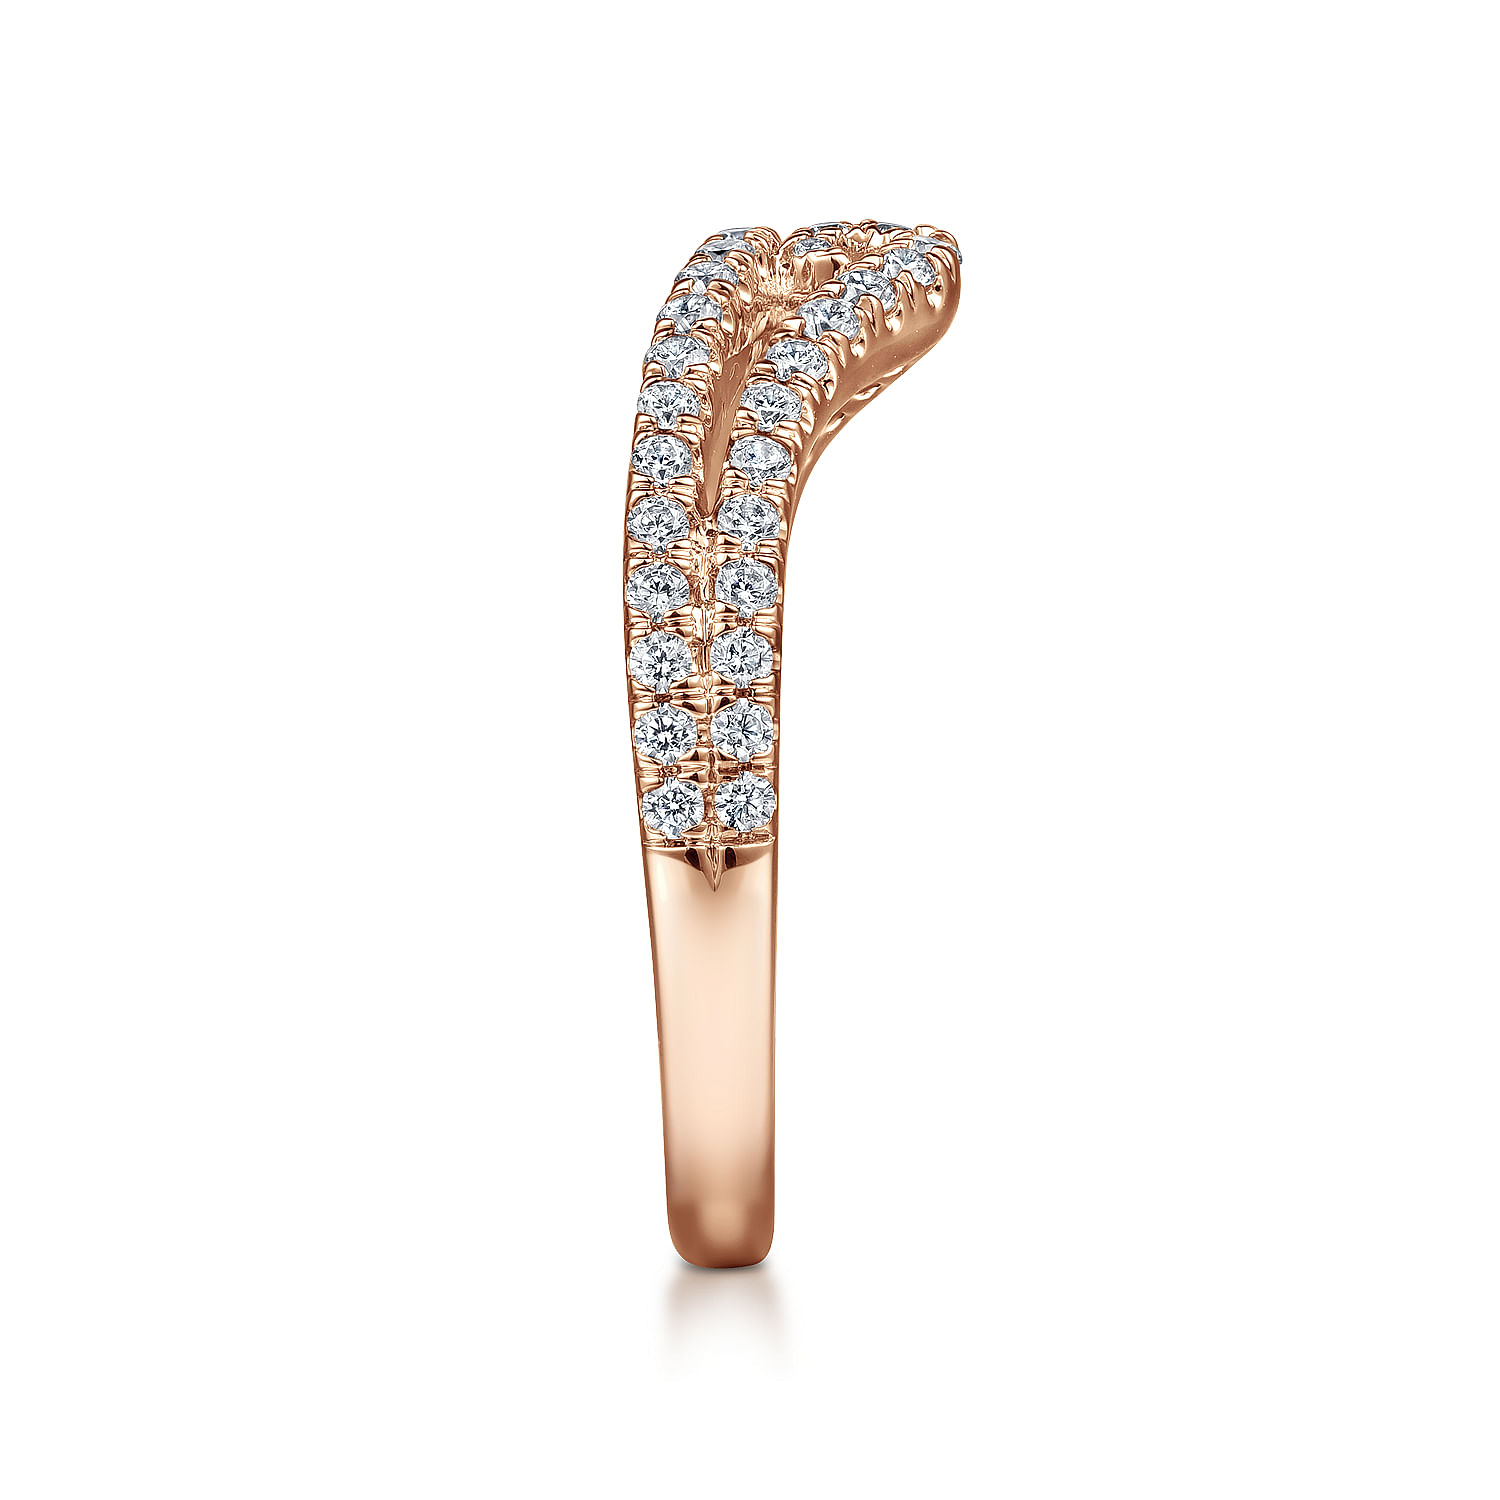 Curved 14K Rose Gold Twisted Diamond Anniversary Band